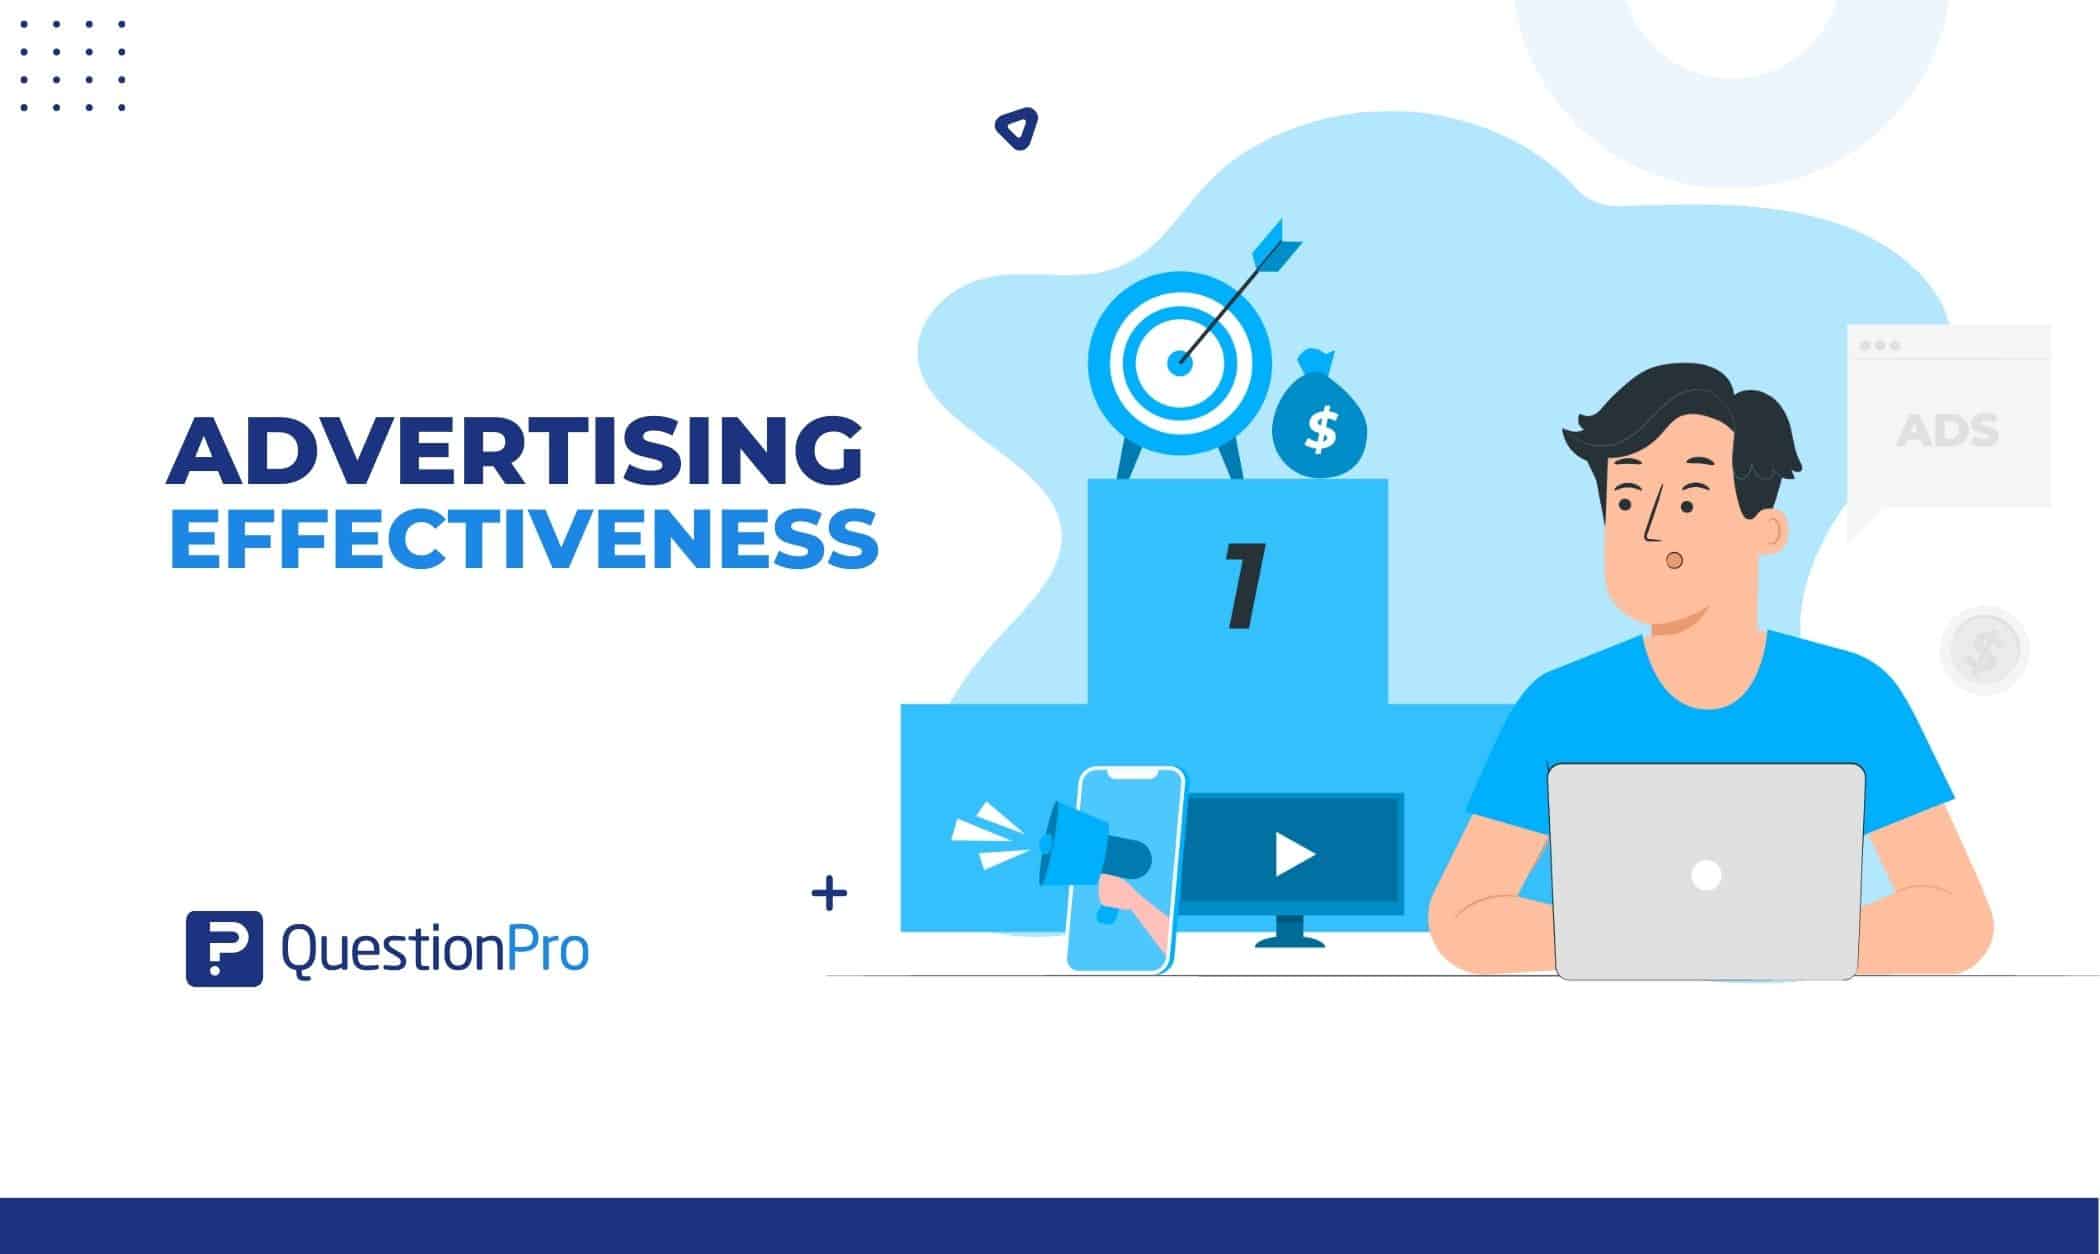 Advertising effectiveness can determine the strengths and weaknesses of marketing efforts. In this blog, we will look at how to measure it.